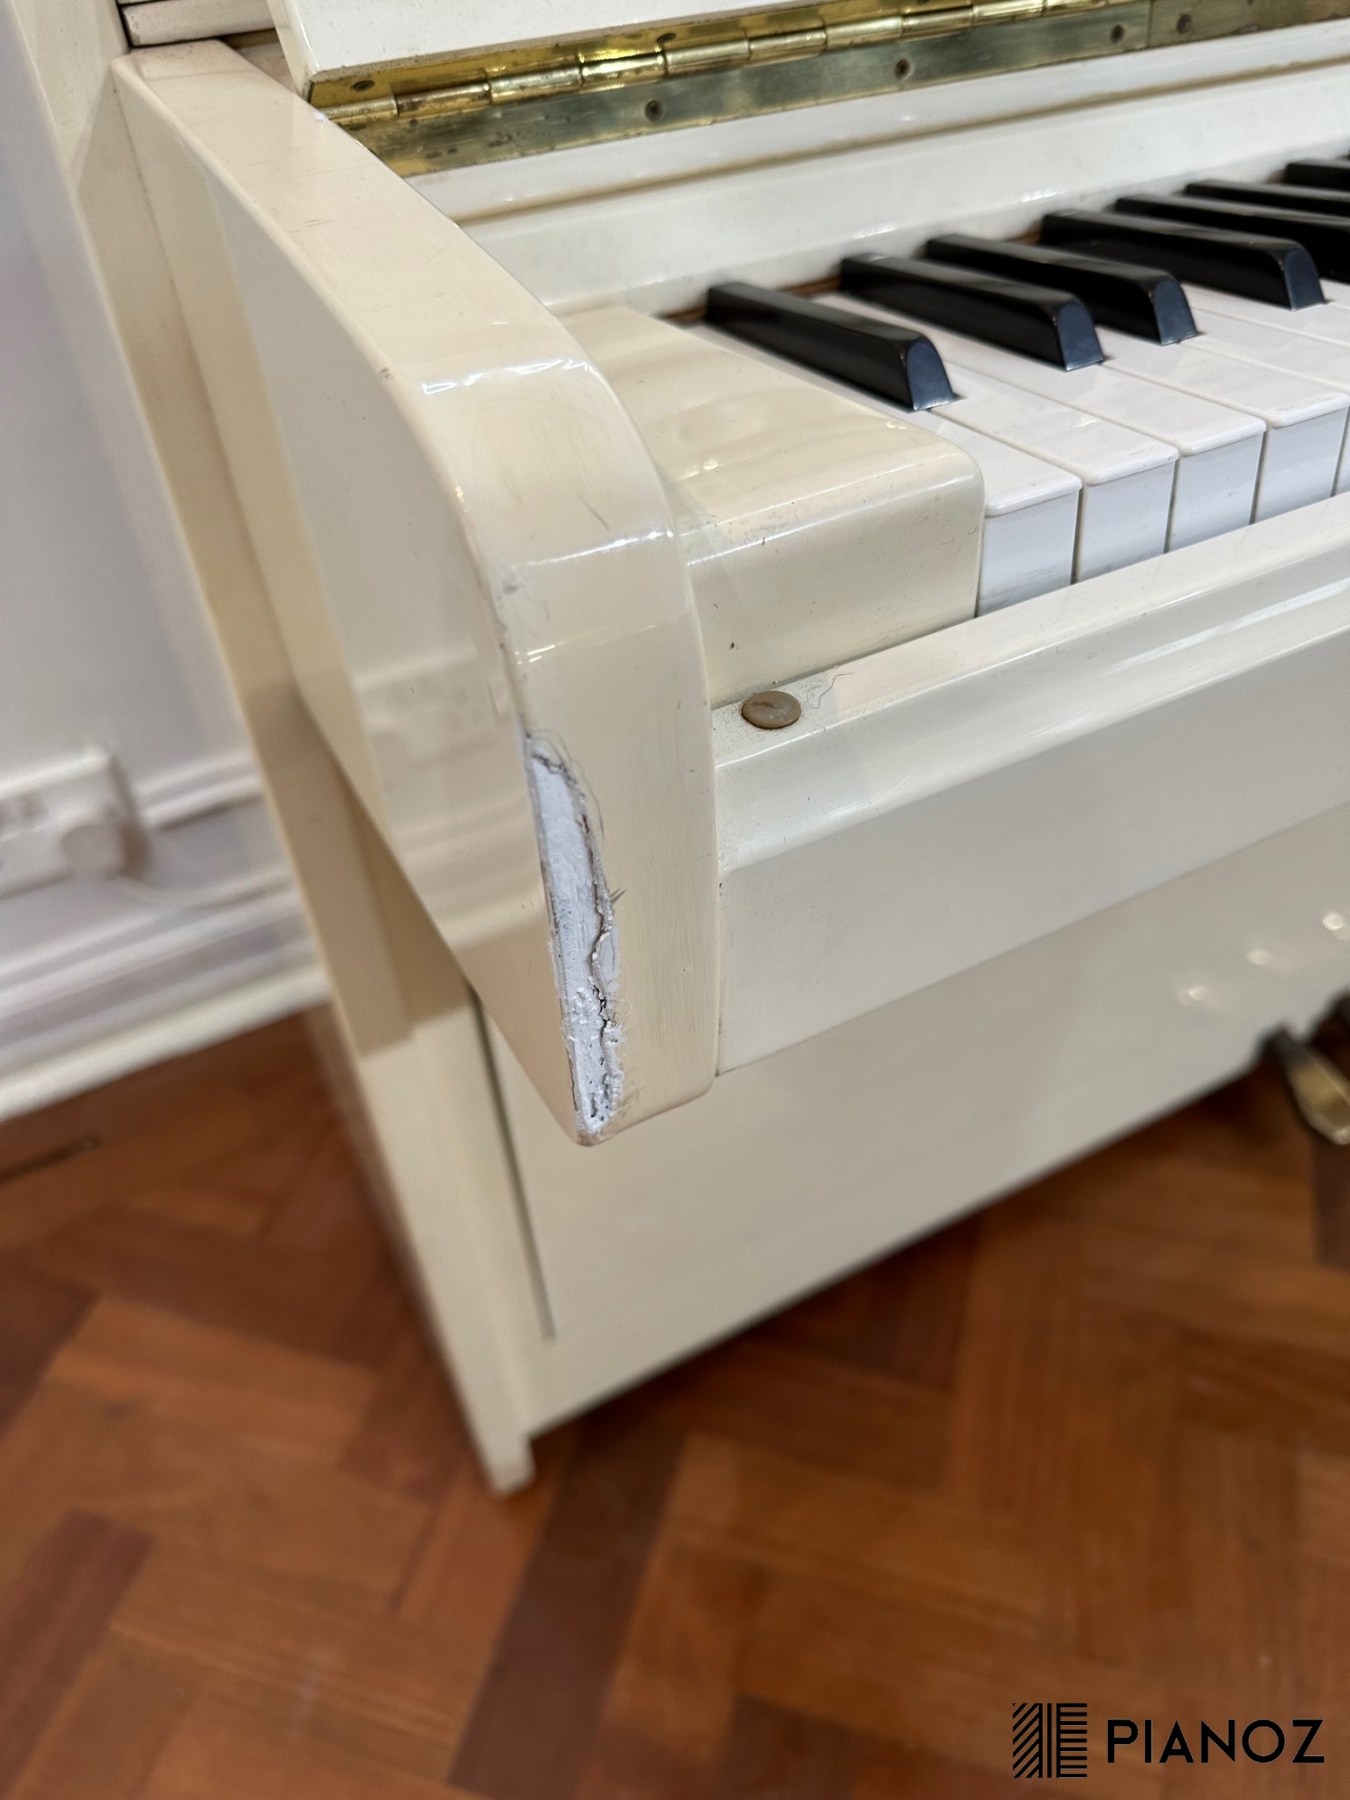 Elysian White Upright Piano piano for sale in UK